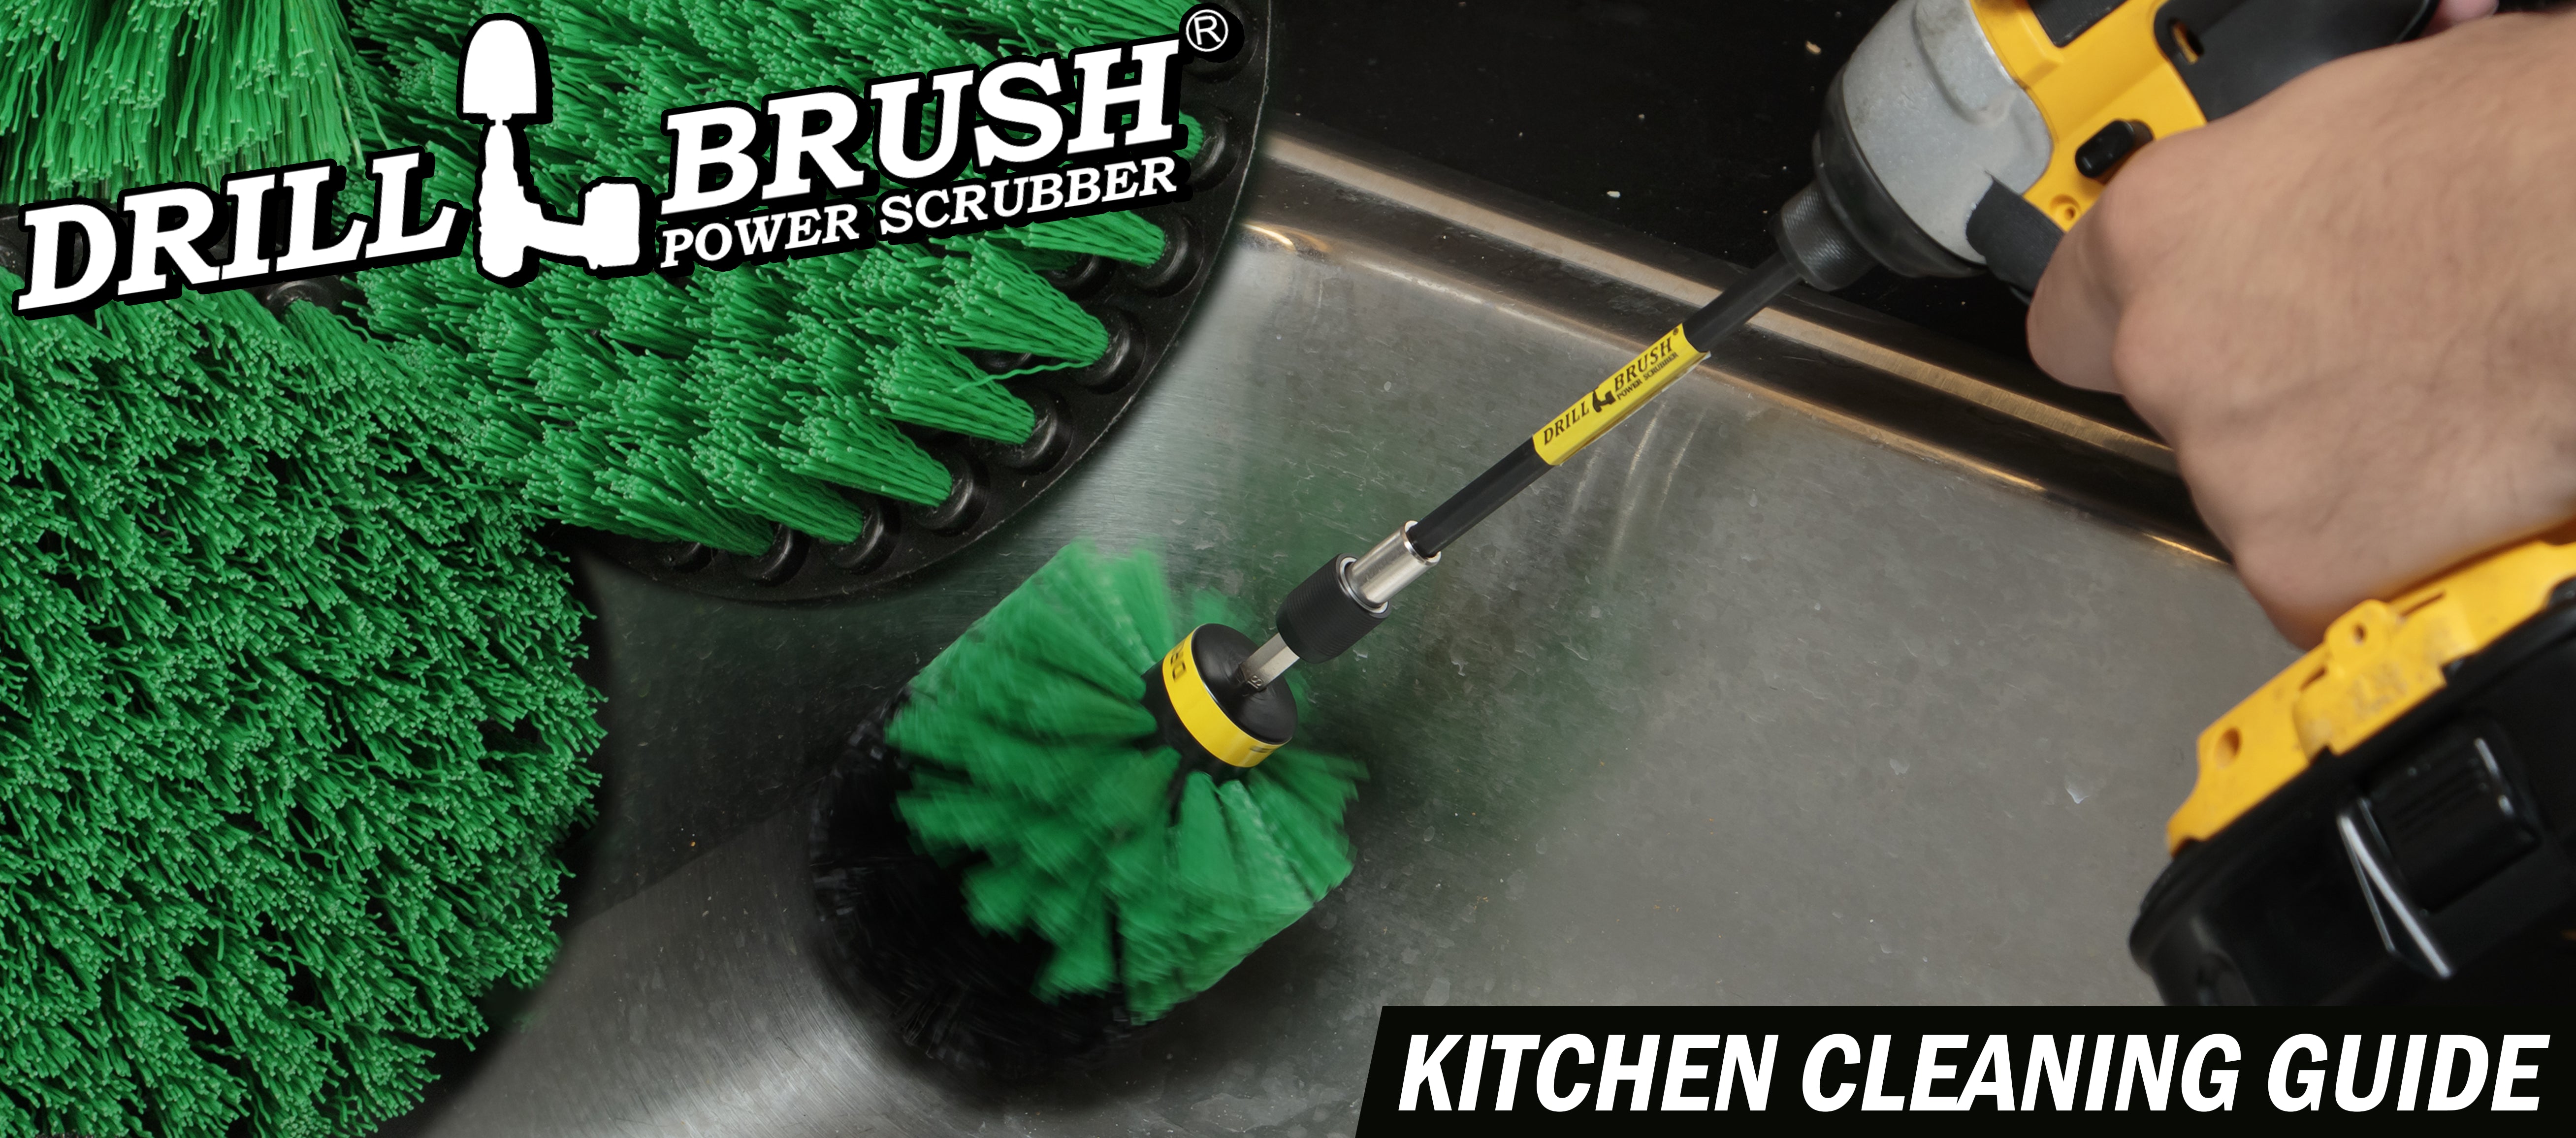 How to Get a Cleaner Kitchen in Half the Time Using a Drillbrush Power Scrubber